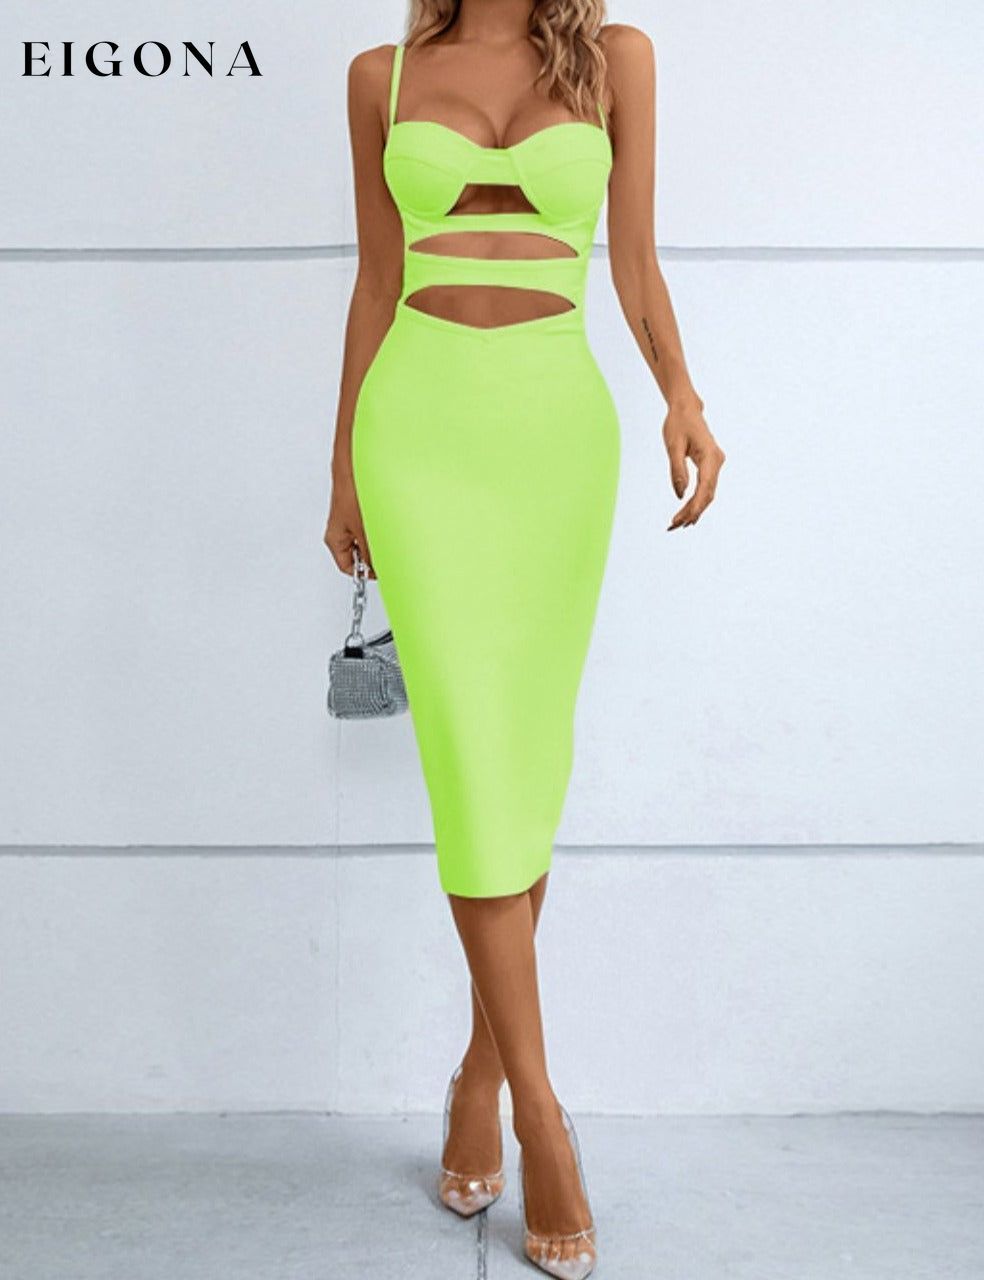 Cutout Spaghetti Strap Bodycon Dress Lime body con clothes cocktail dresses dress dresses evening evening dress evening dresses formal dress formal dresses midi dress midi dresses NF Ship From Overseas trend